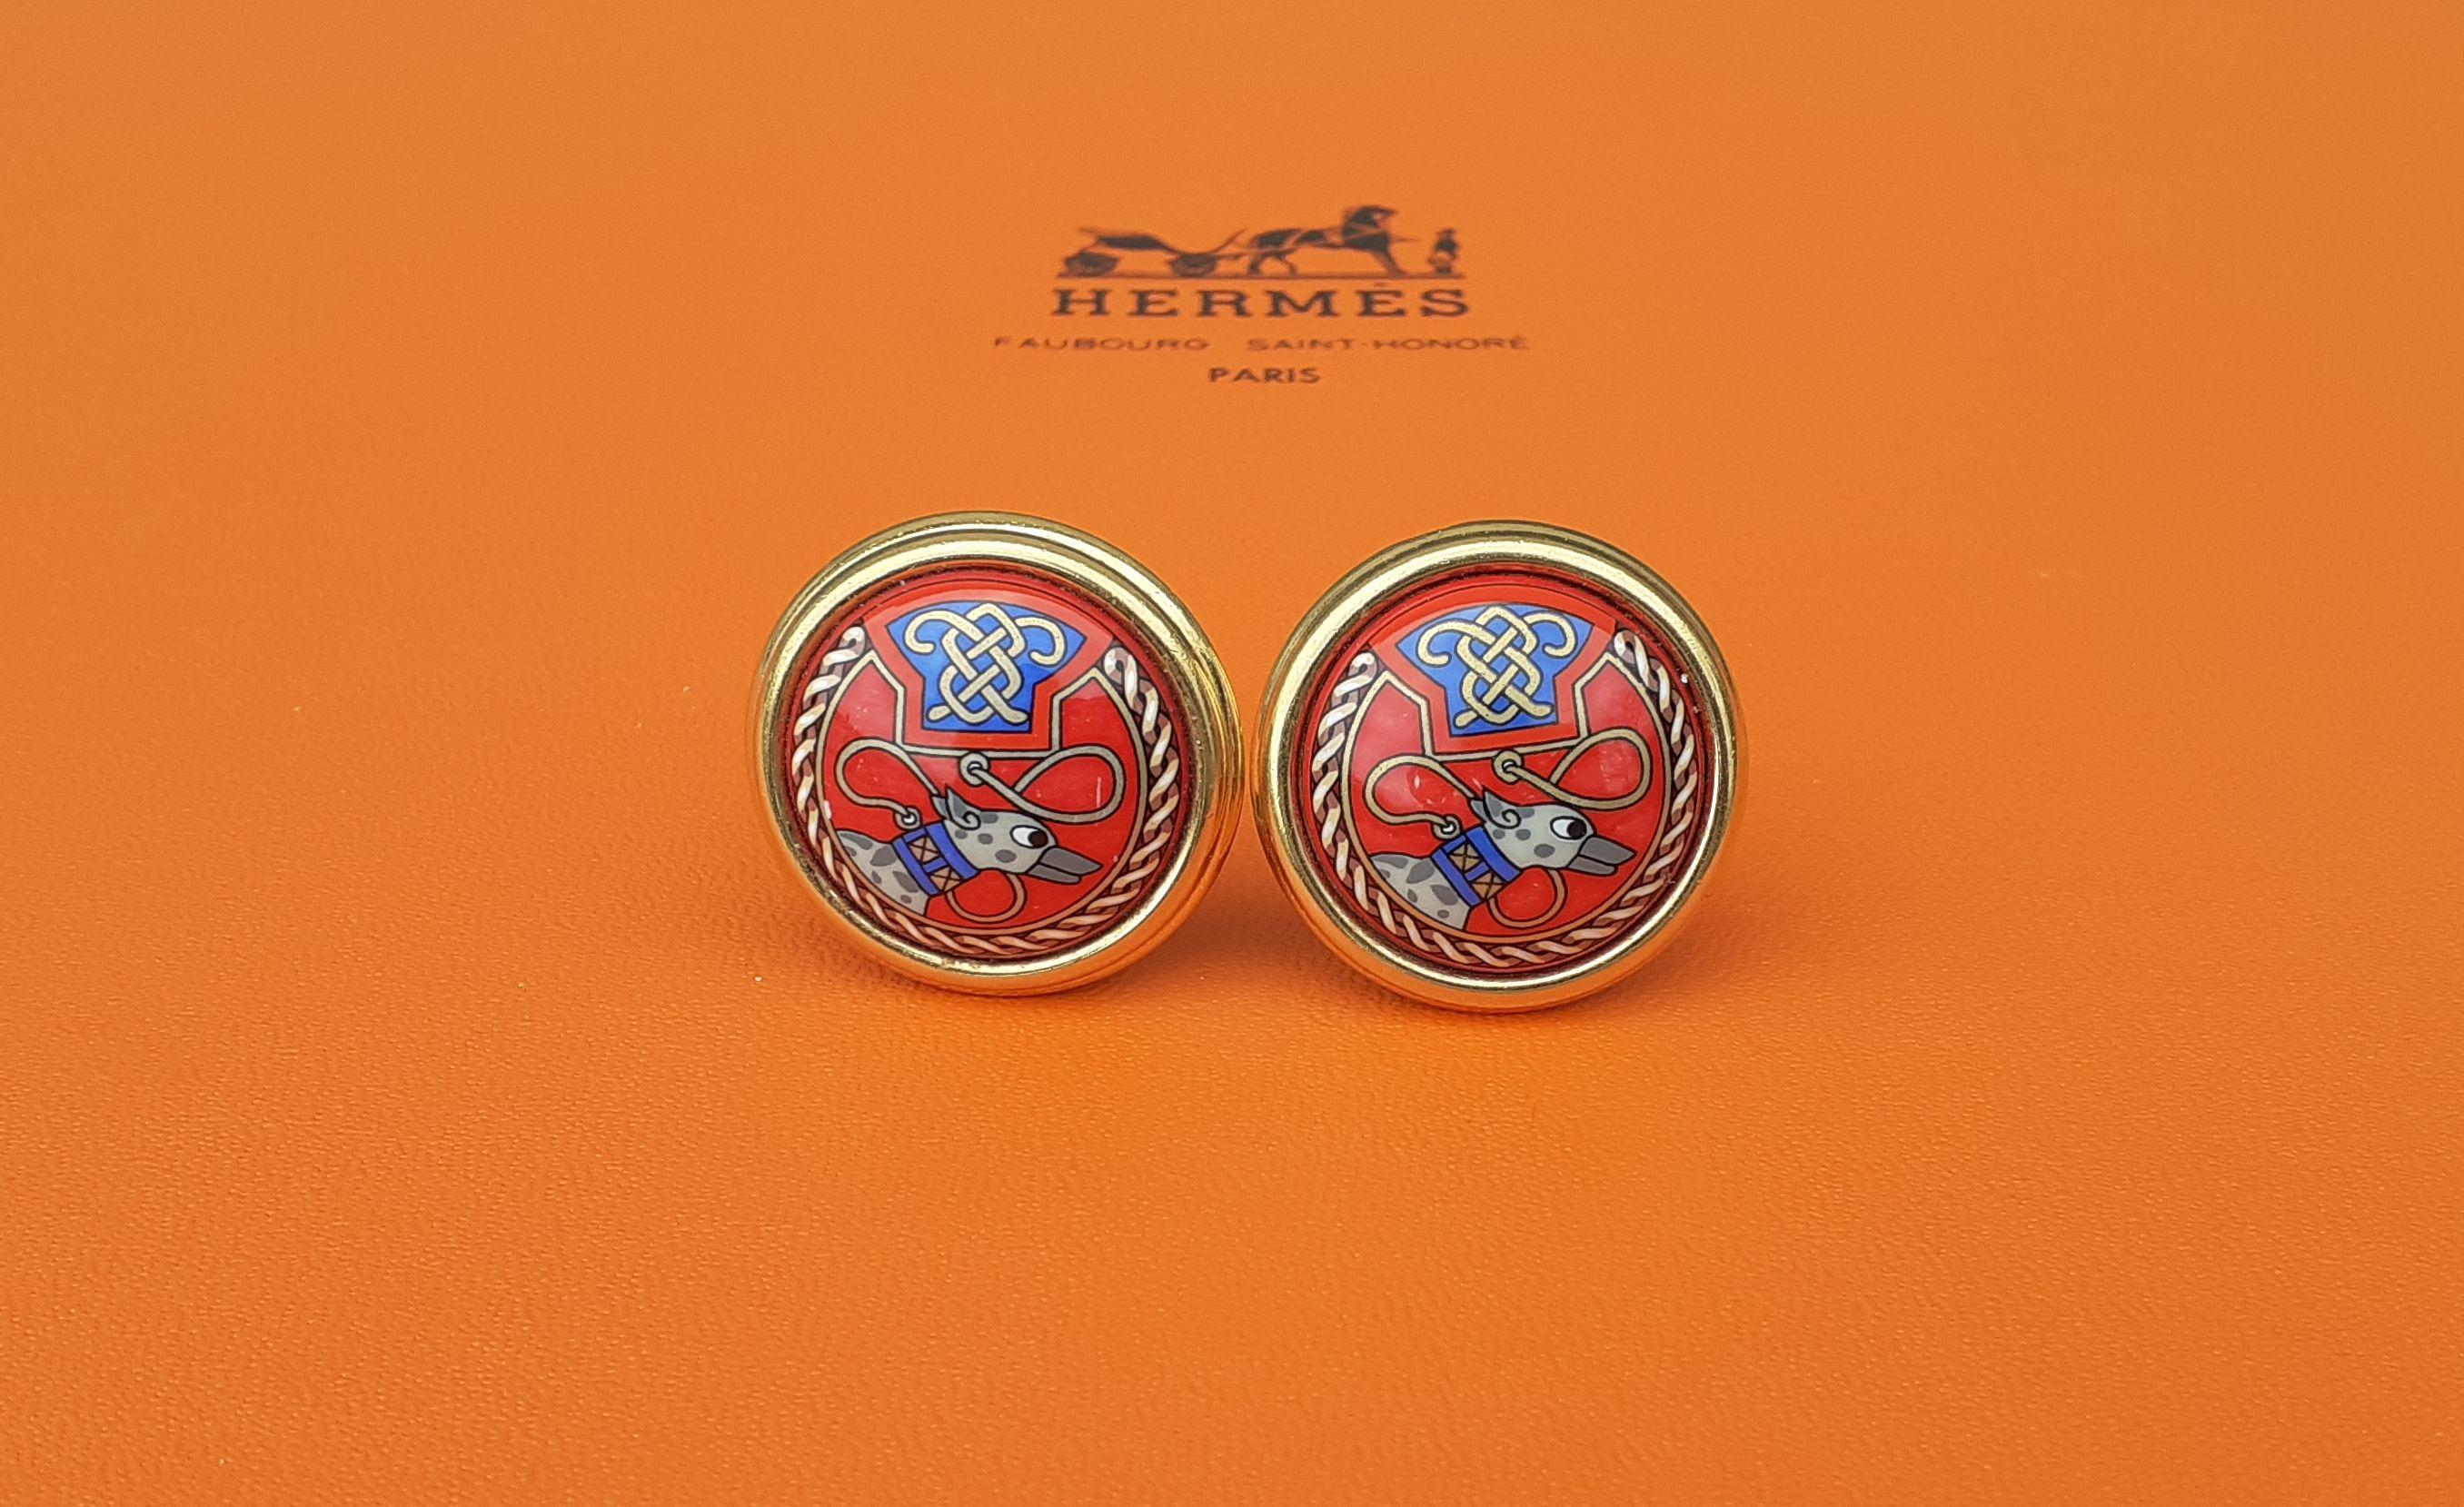 Hermès Enamel Printed Clip-On Earrings Greyhound Dogs Levriers Ghw RARE For Sale 4